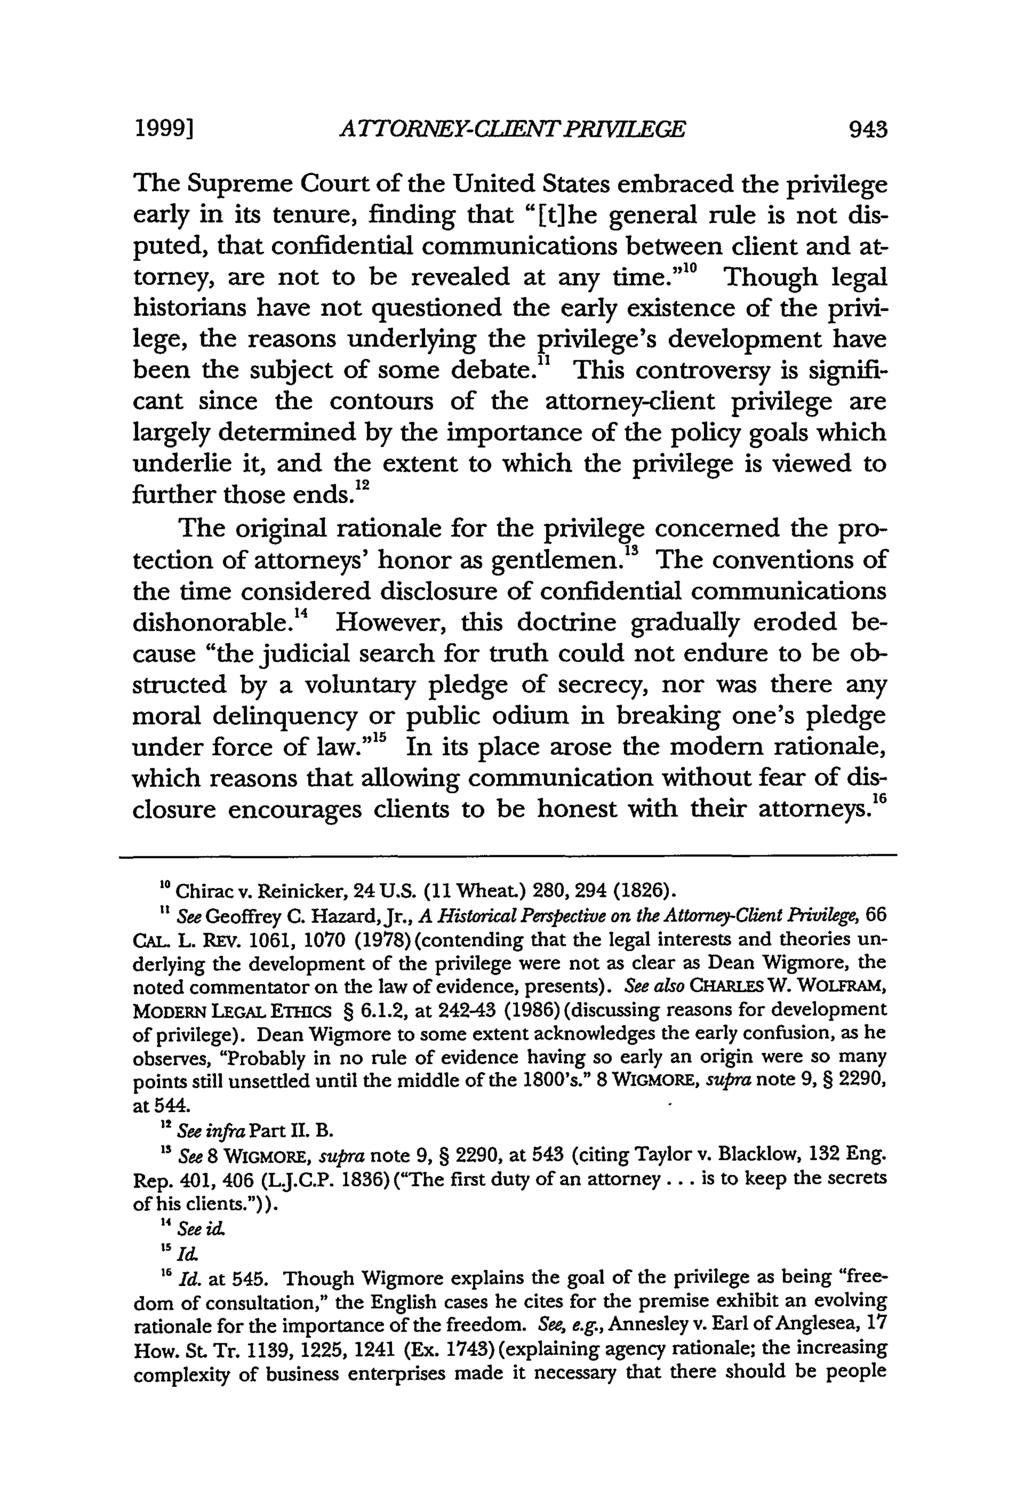 1999] A TTORNEY- CLENT PPJVILEGE The Supreme Court of the United States embraced the privilege early in its tenure, finding that "[t]he general rule is not disputed, that confidential communications